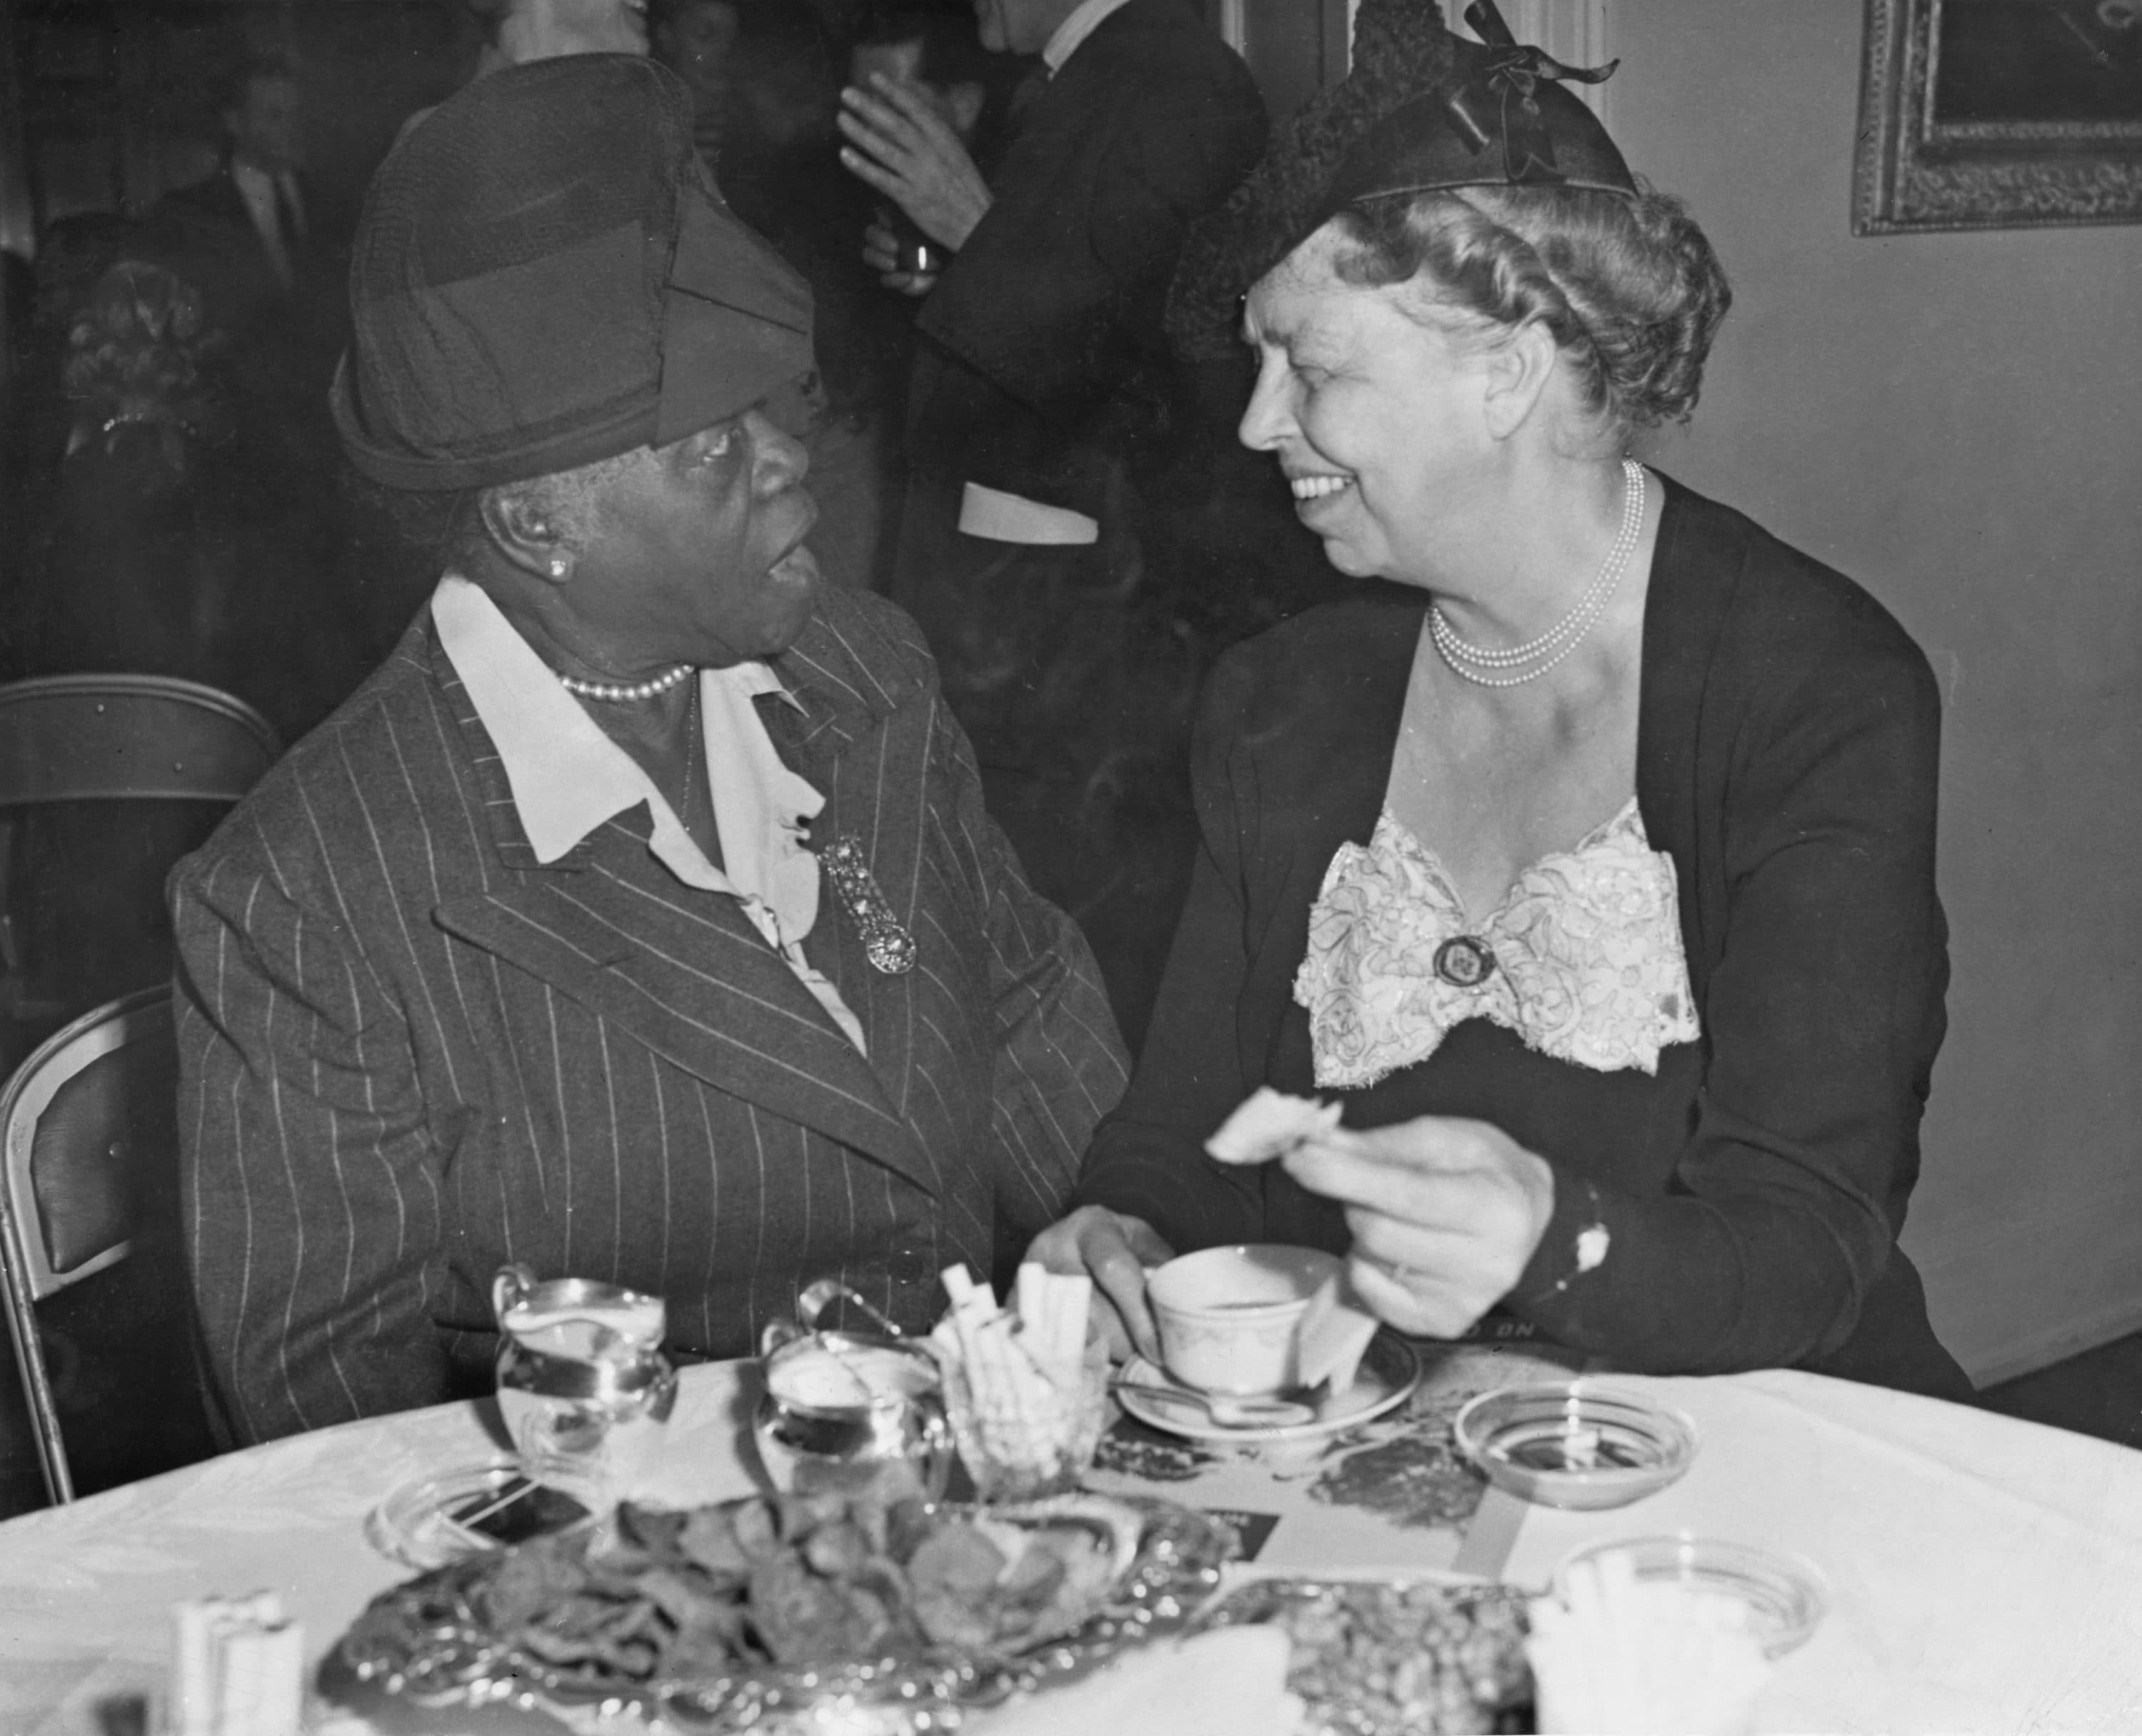 American educator, philanthropist, humanitarian and civil rights activist Mary McLeod Bethune and American political figure, diplomat and activist Eleanor Roosevelt. (Keystone/Hulton Archive/Getty Images)